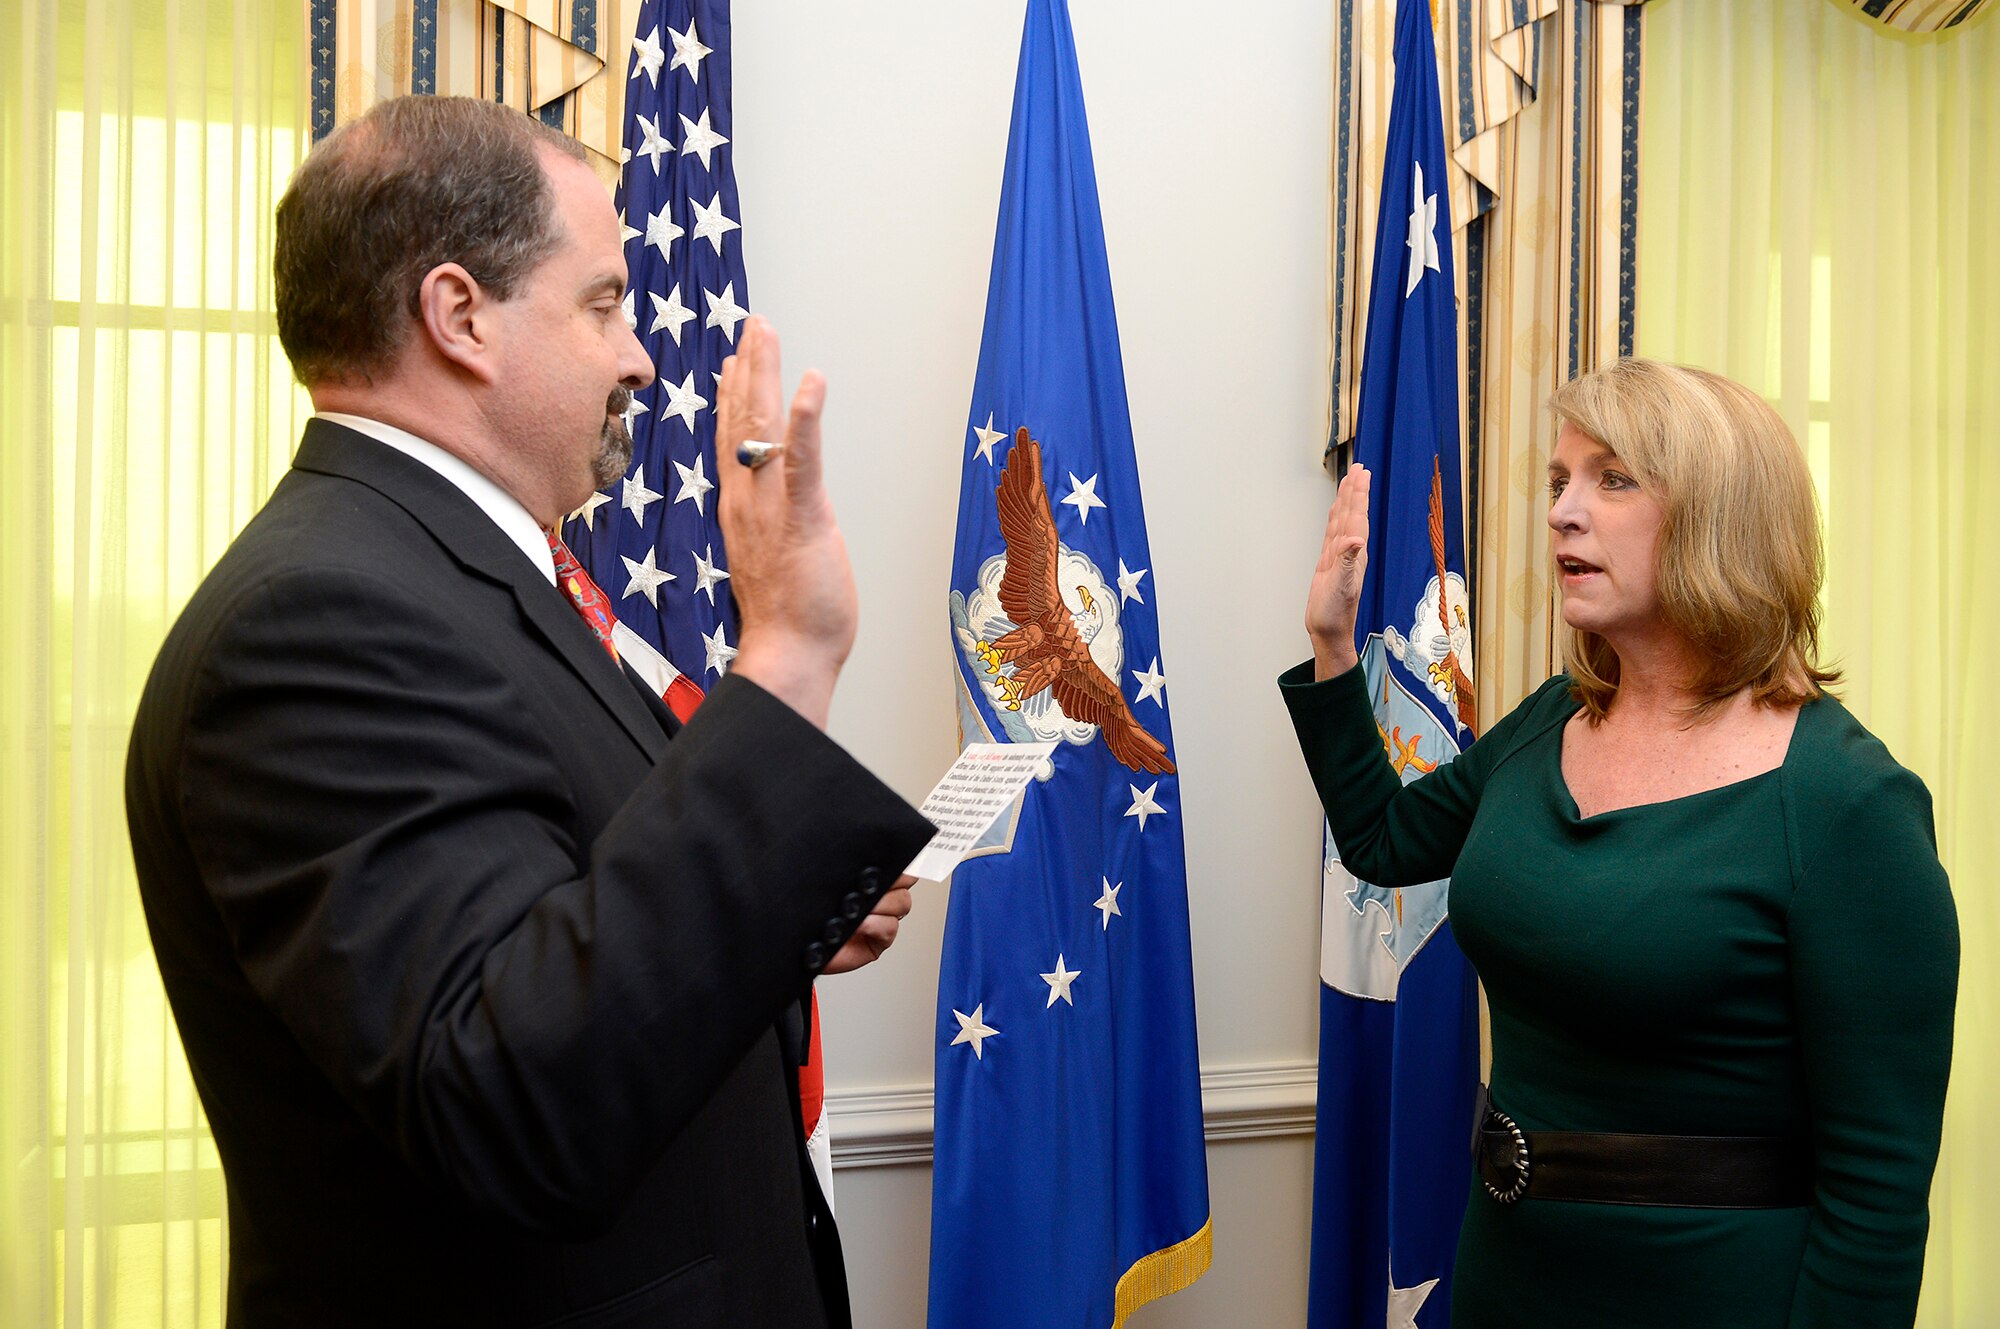 Timothy Beyland (left) swears in Deborah Lee James as the 23rd Air Force secretary Dec. 20, 2013, at the Pentagon. James is responsible for the affairs of the Department of the Air Force, including the organizing, training, equipping and providing for the welfare of its more than 690,000 active duty, Guard, Reserve and civilian Airmen and their families. Beyland is the administrative assistant to the secretary of the Air Force. (U.S. Air Force photo/Scott M. Ash)  